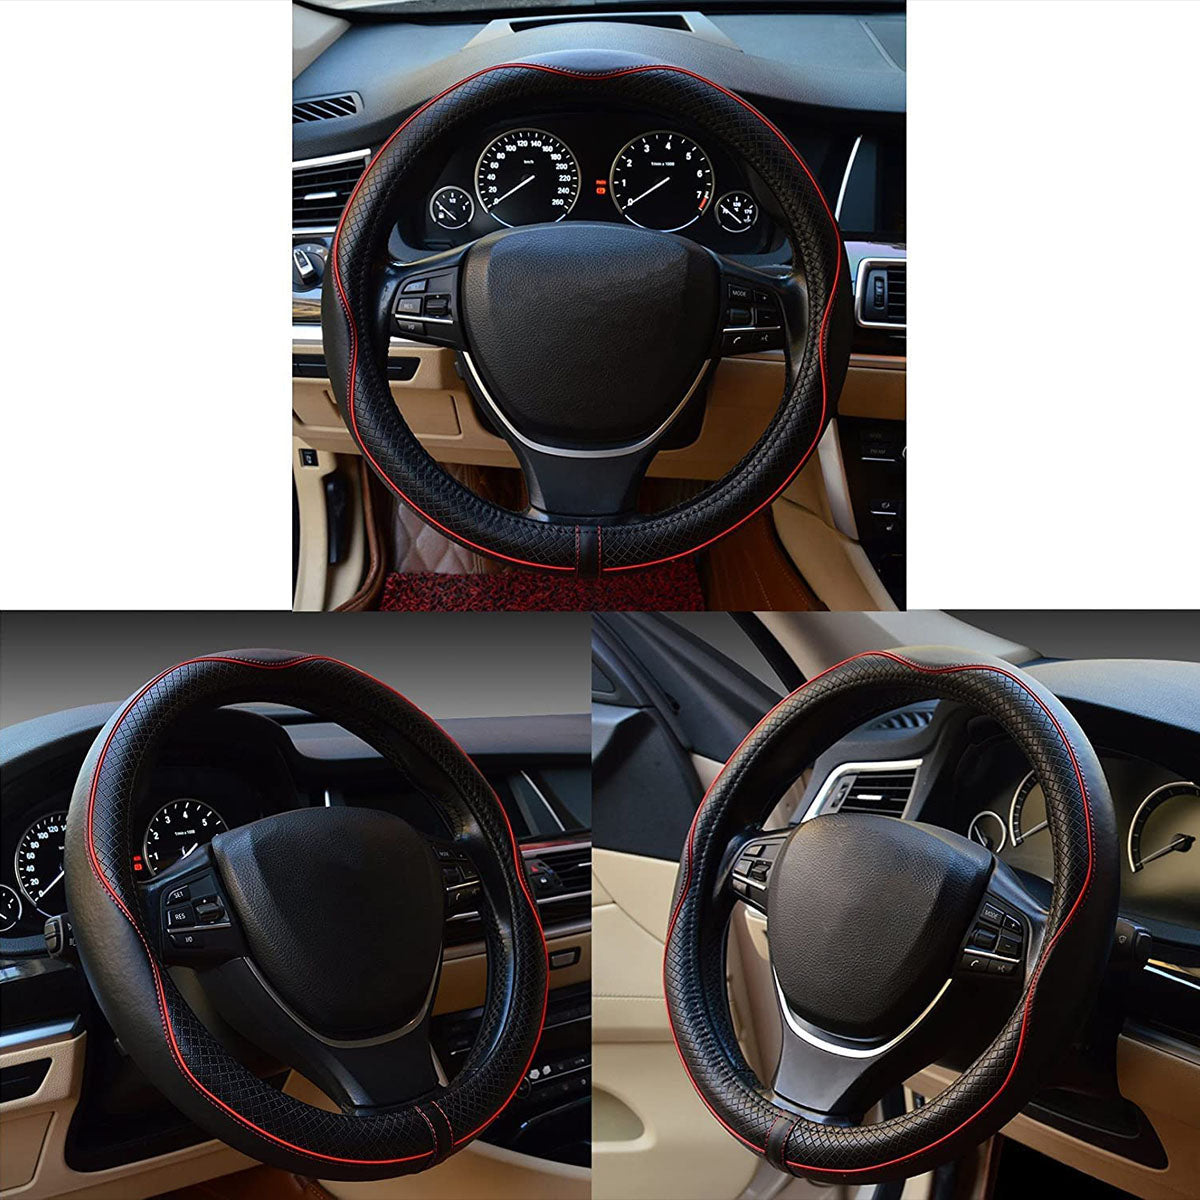 Car Steering Wheel Cover, Custom For Your Cars, Anti-Slip, Safety, Soft, Breathable, Heavy Duty, Thick, Full Surround, Sports Style, Car Accessories MY18990